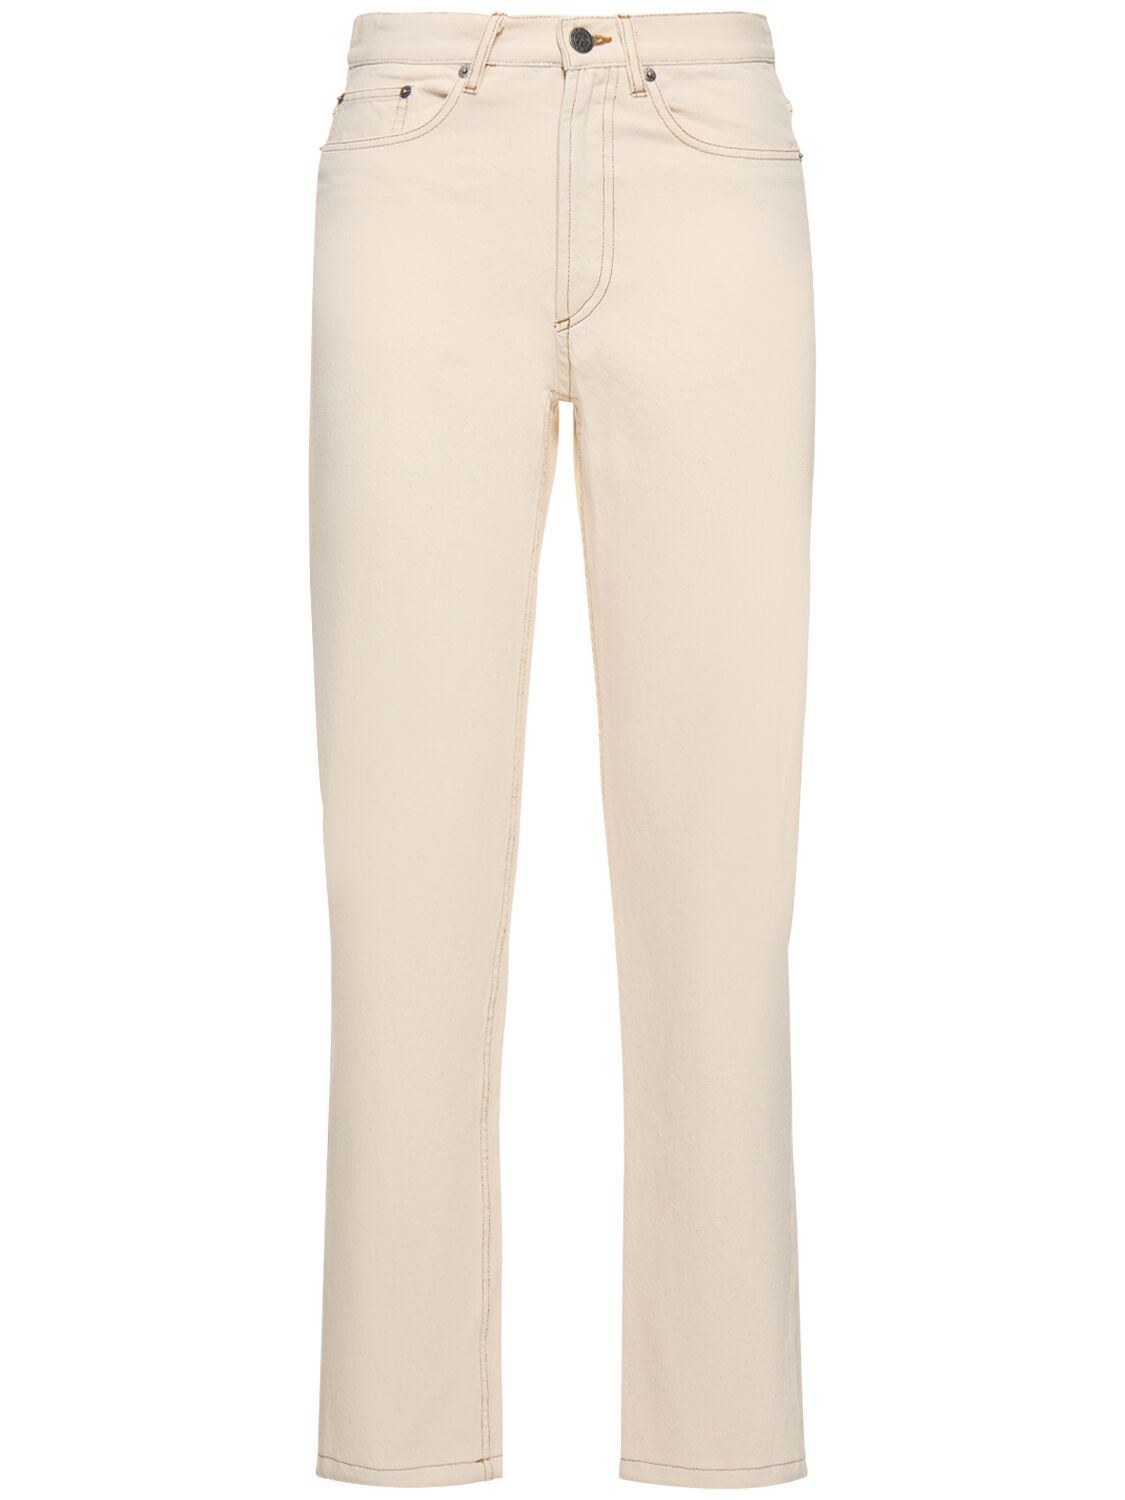 Apc Marin Straight Cotton Jeans In Ivory